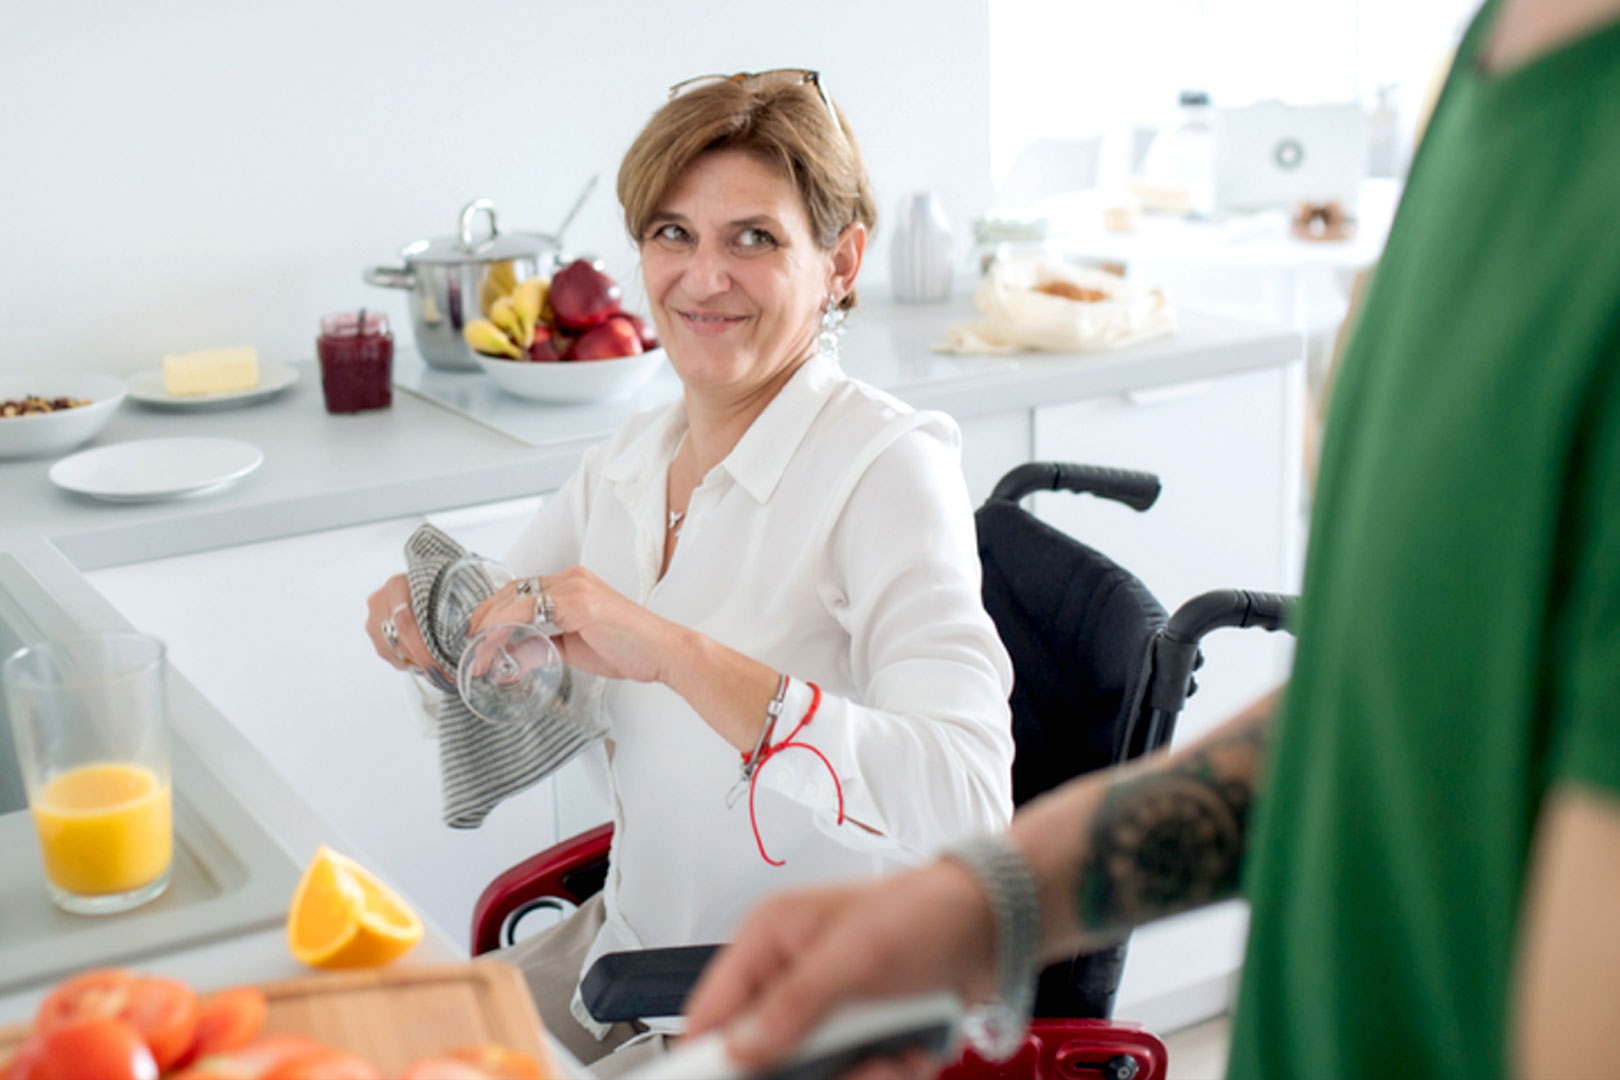 A woman in a wheelchair smiles at a man standing in a green top while she dries a cup with a dish towel in the kitchen